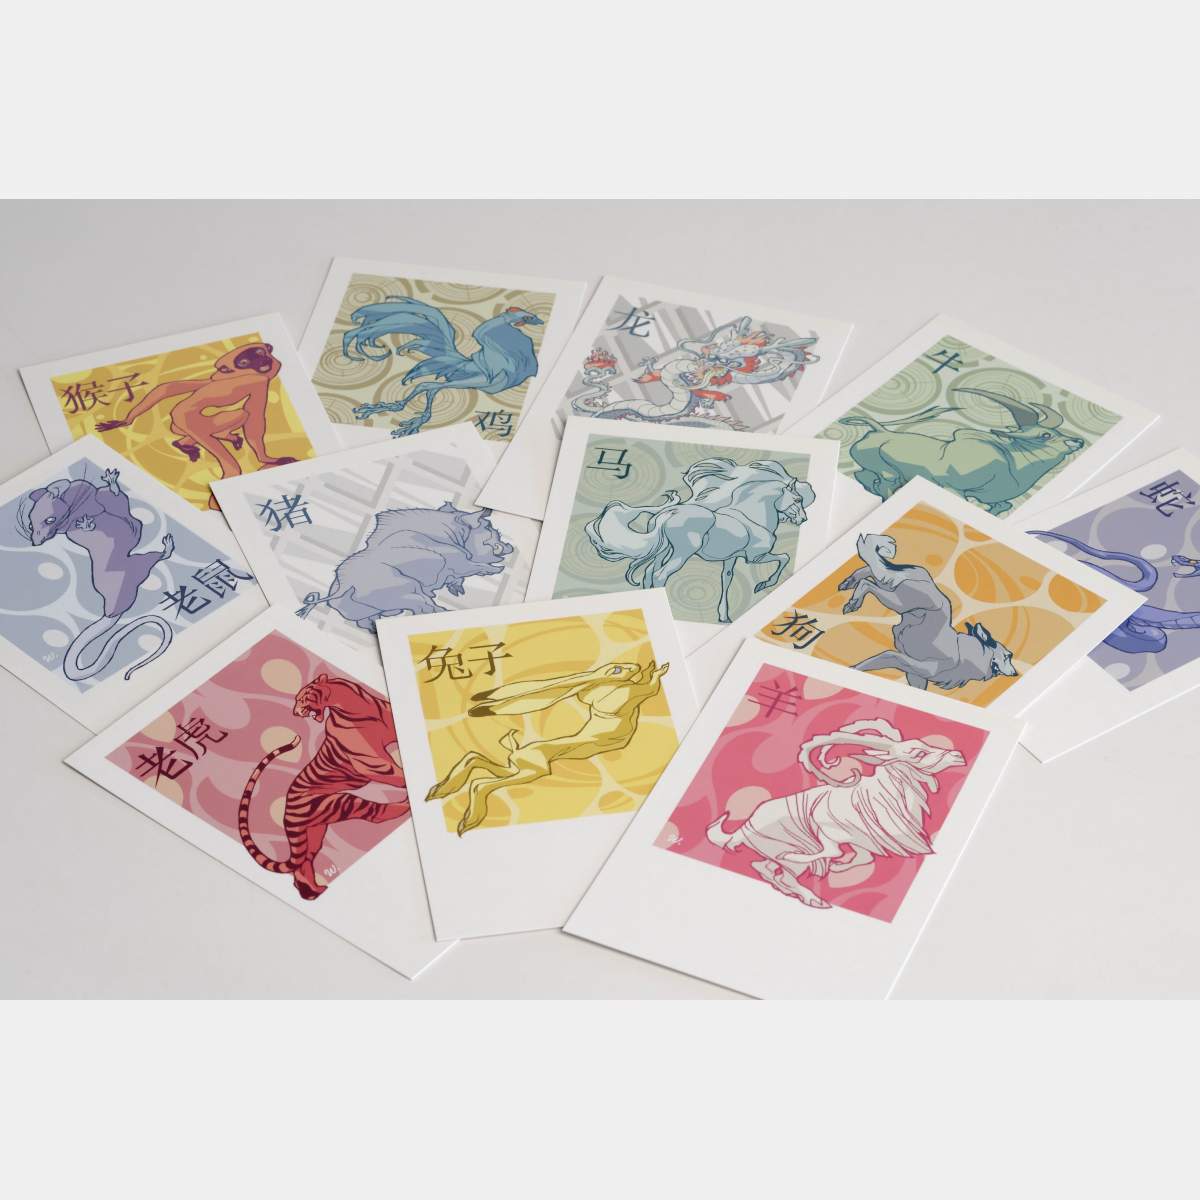 Claire Wendling - 'Chinese Zodiac' postcards